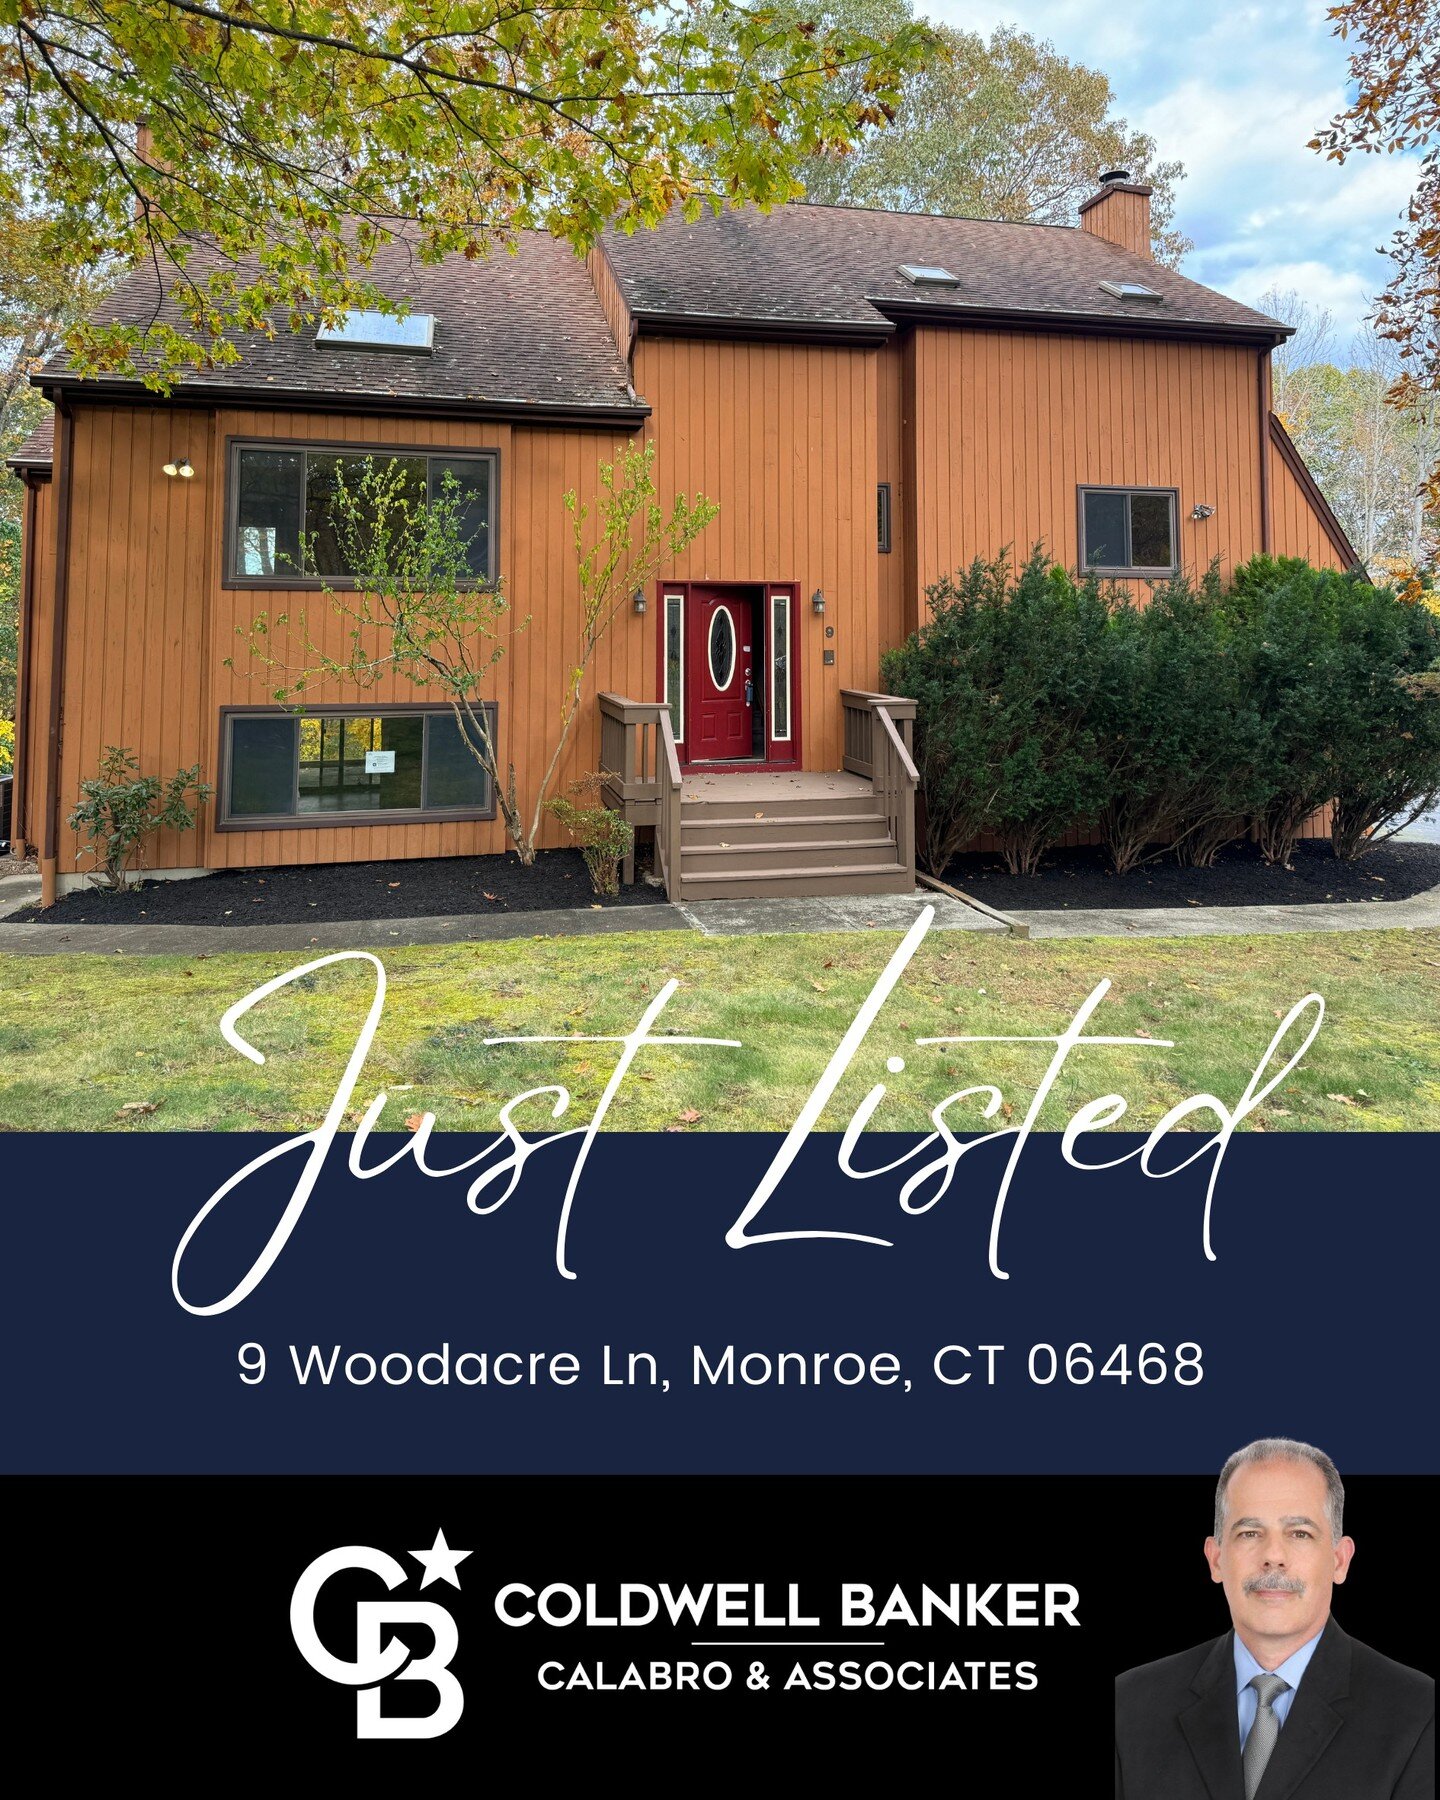 Congratulations Michael on your new listing - 9 Woodacre Lane, Monroe CT 06468! 

This contemporary colonial style home has 10 rooms, 4 bedrooms, 3.5 bathrooms and is located on a quiet cul-de-sac street. The property sits on a 1 acre lot. The wrap a